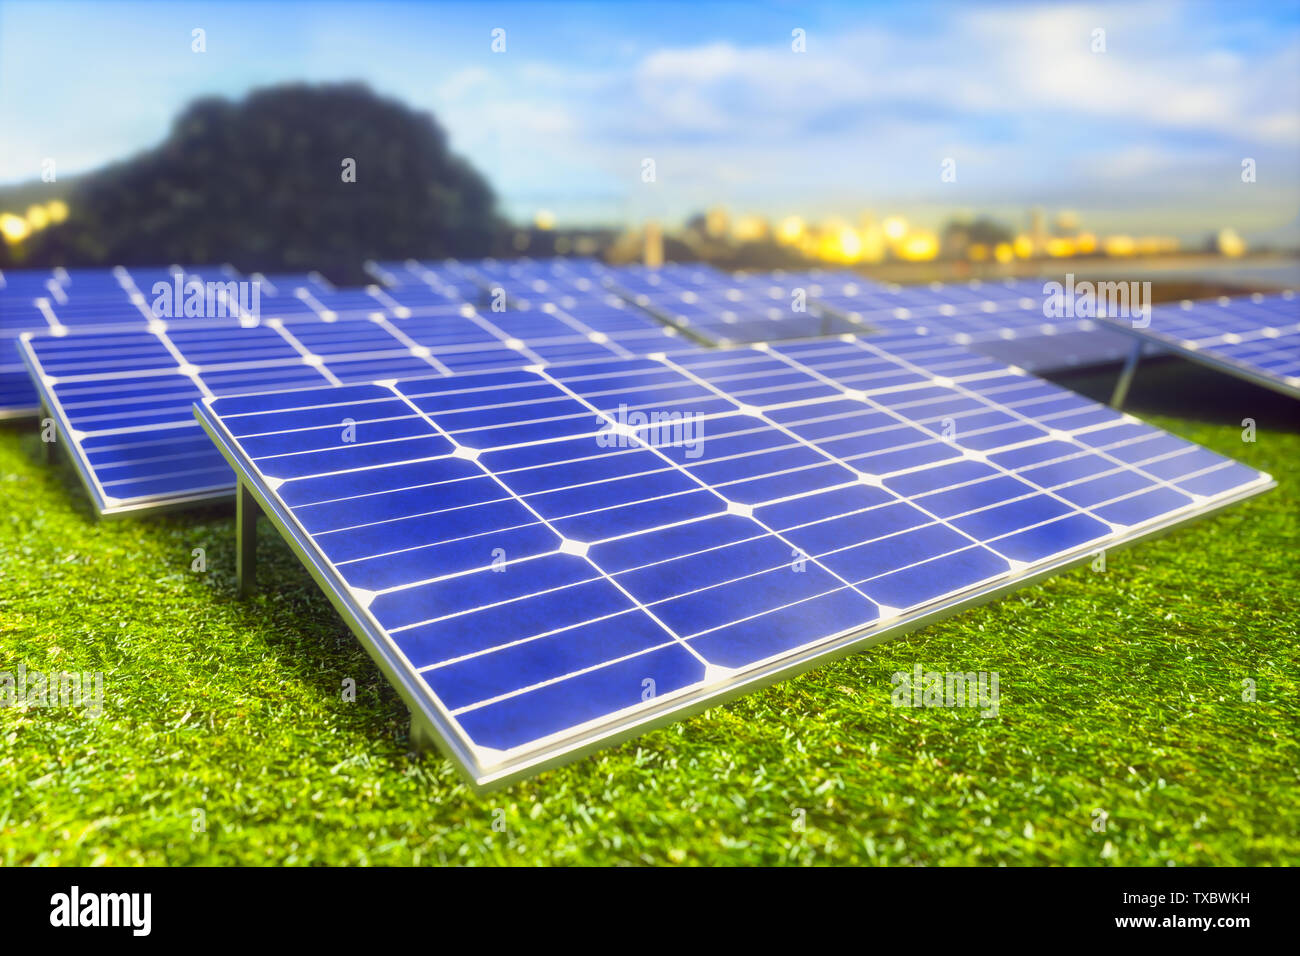 Solar panels spread across the field on the green grass. In the background the city for which energy is provided. Stock Photo